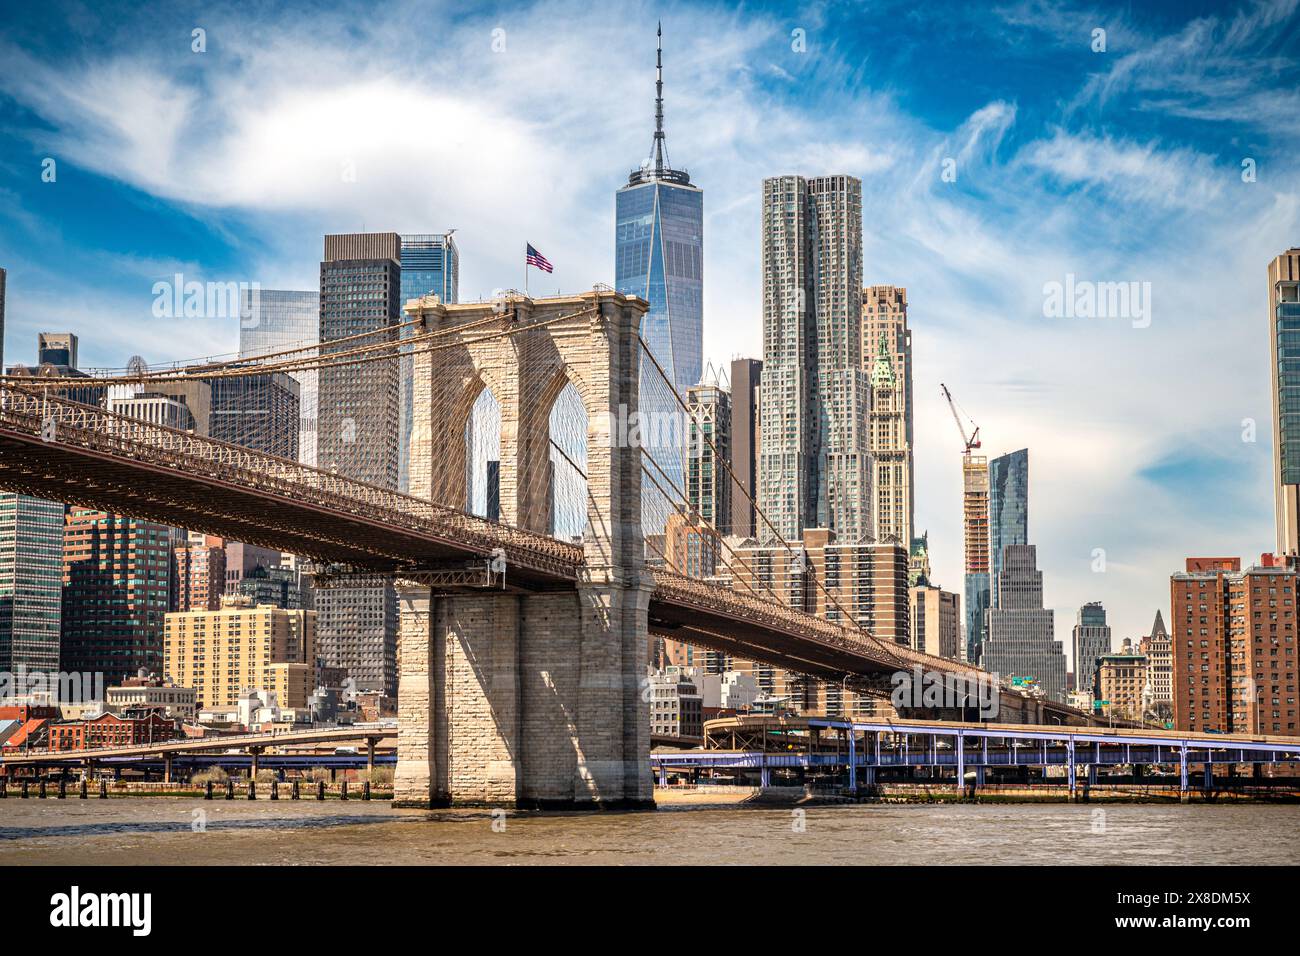 Majestic Brooklyn Bridge graces the NYC skyline. Soaring steel arches frame the cityscape, bathed in warm sunlight. Iconic landmark for travel . Stock Photo